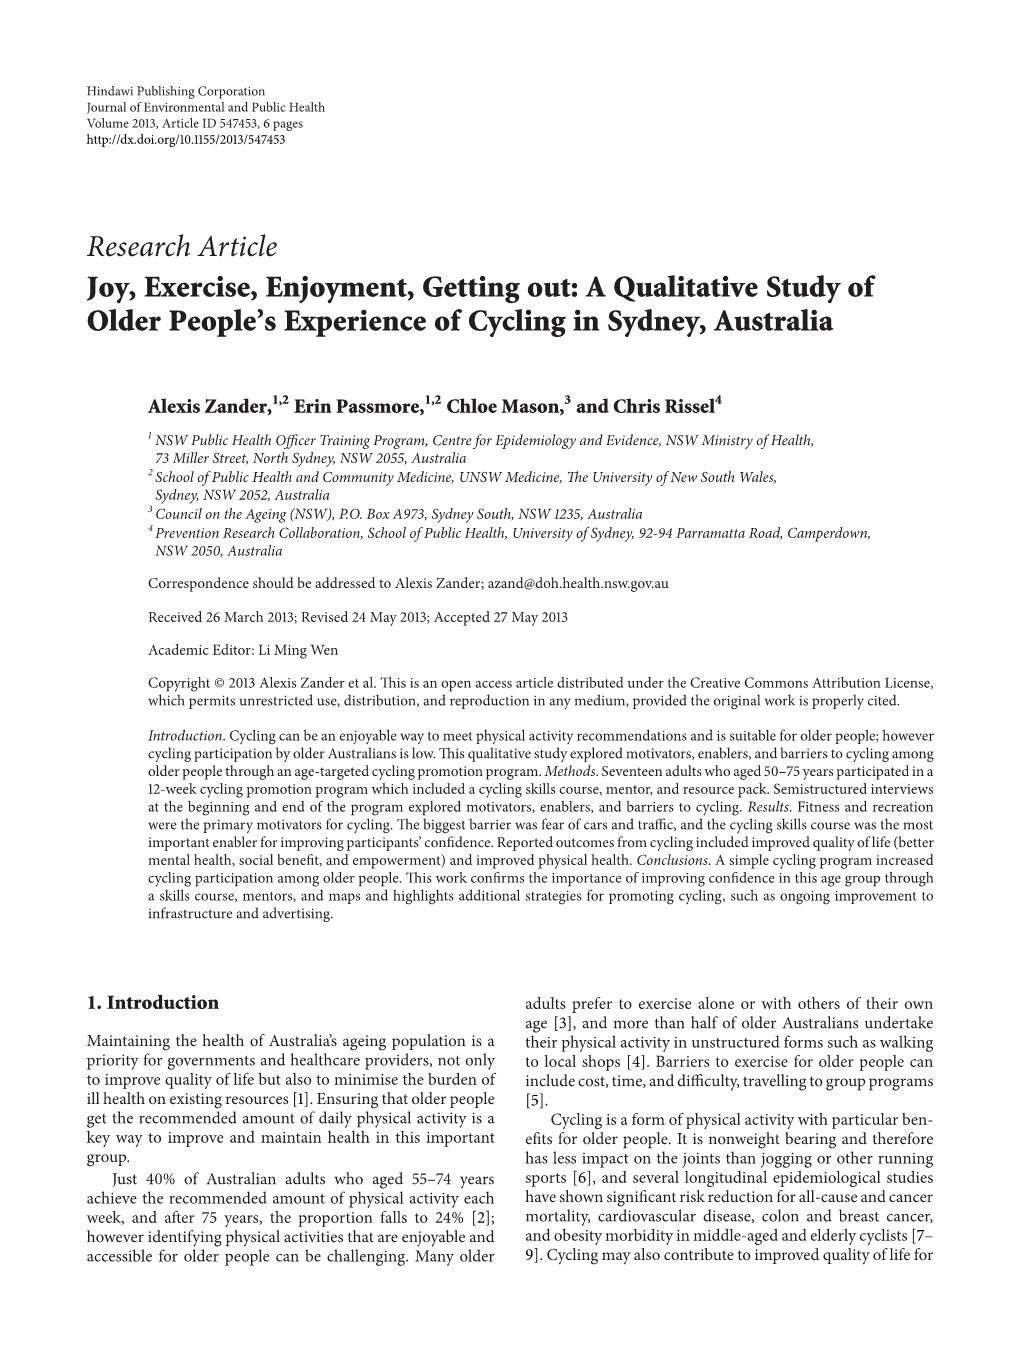 Joy, Exercise, Enjoyment, Getting Out: a Qualitative Study of Older People’S Experience of Cycling in Sydney, Australia